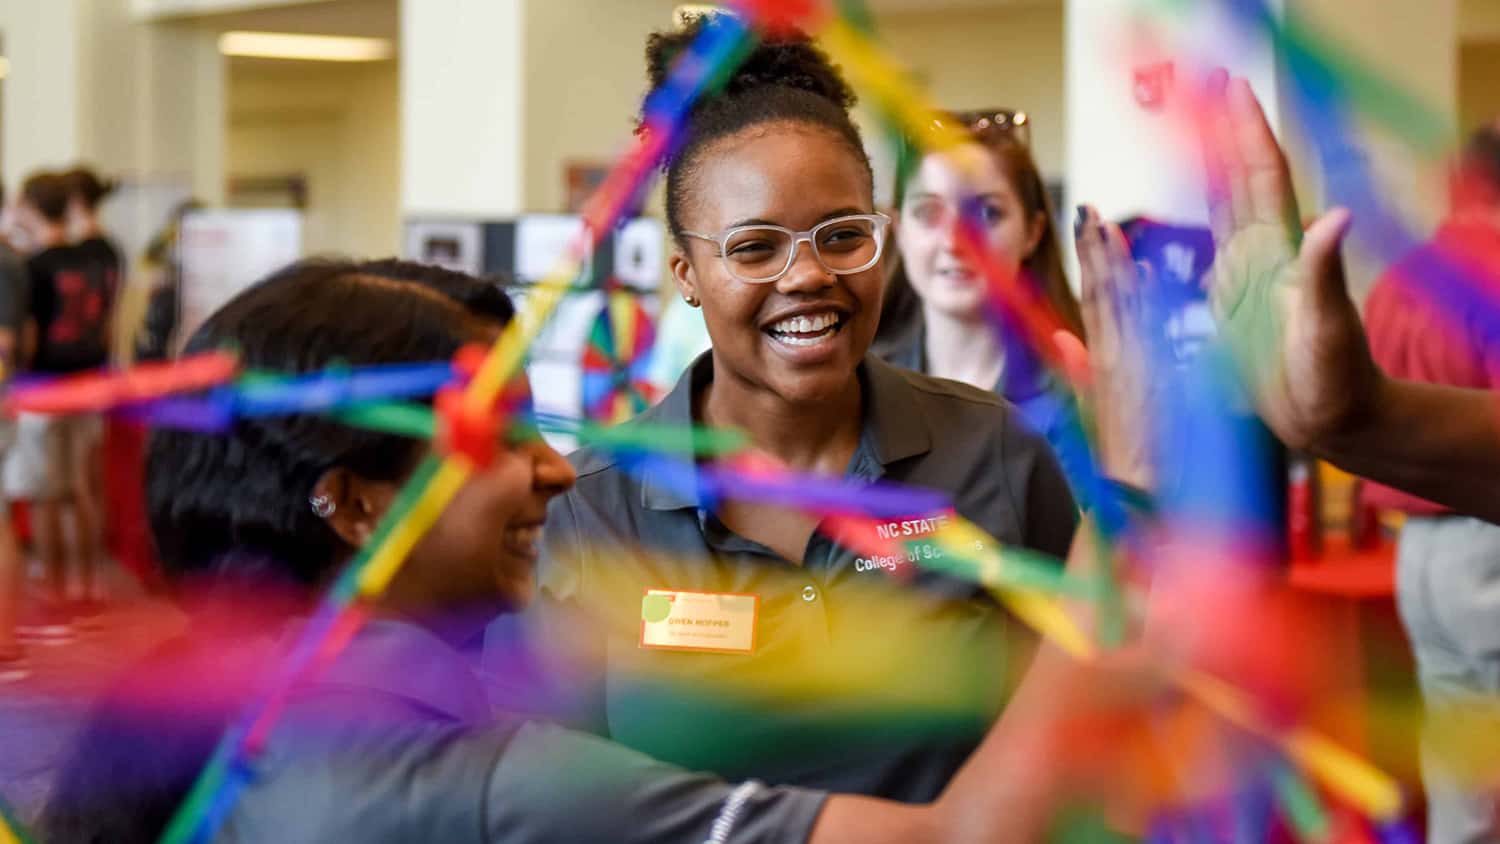 Smiling students interact with a colorful scientific demonstration at the College Connections fair